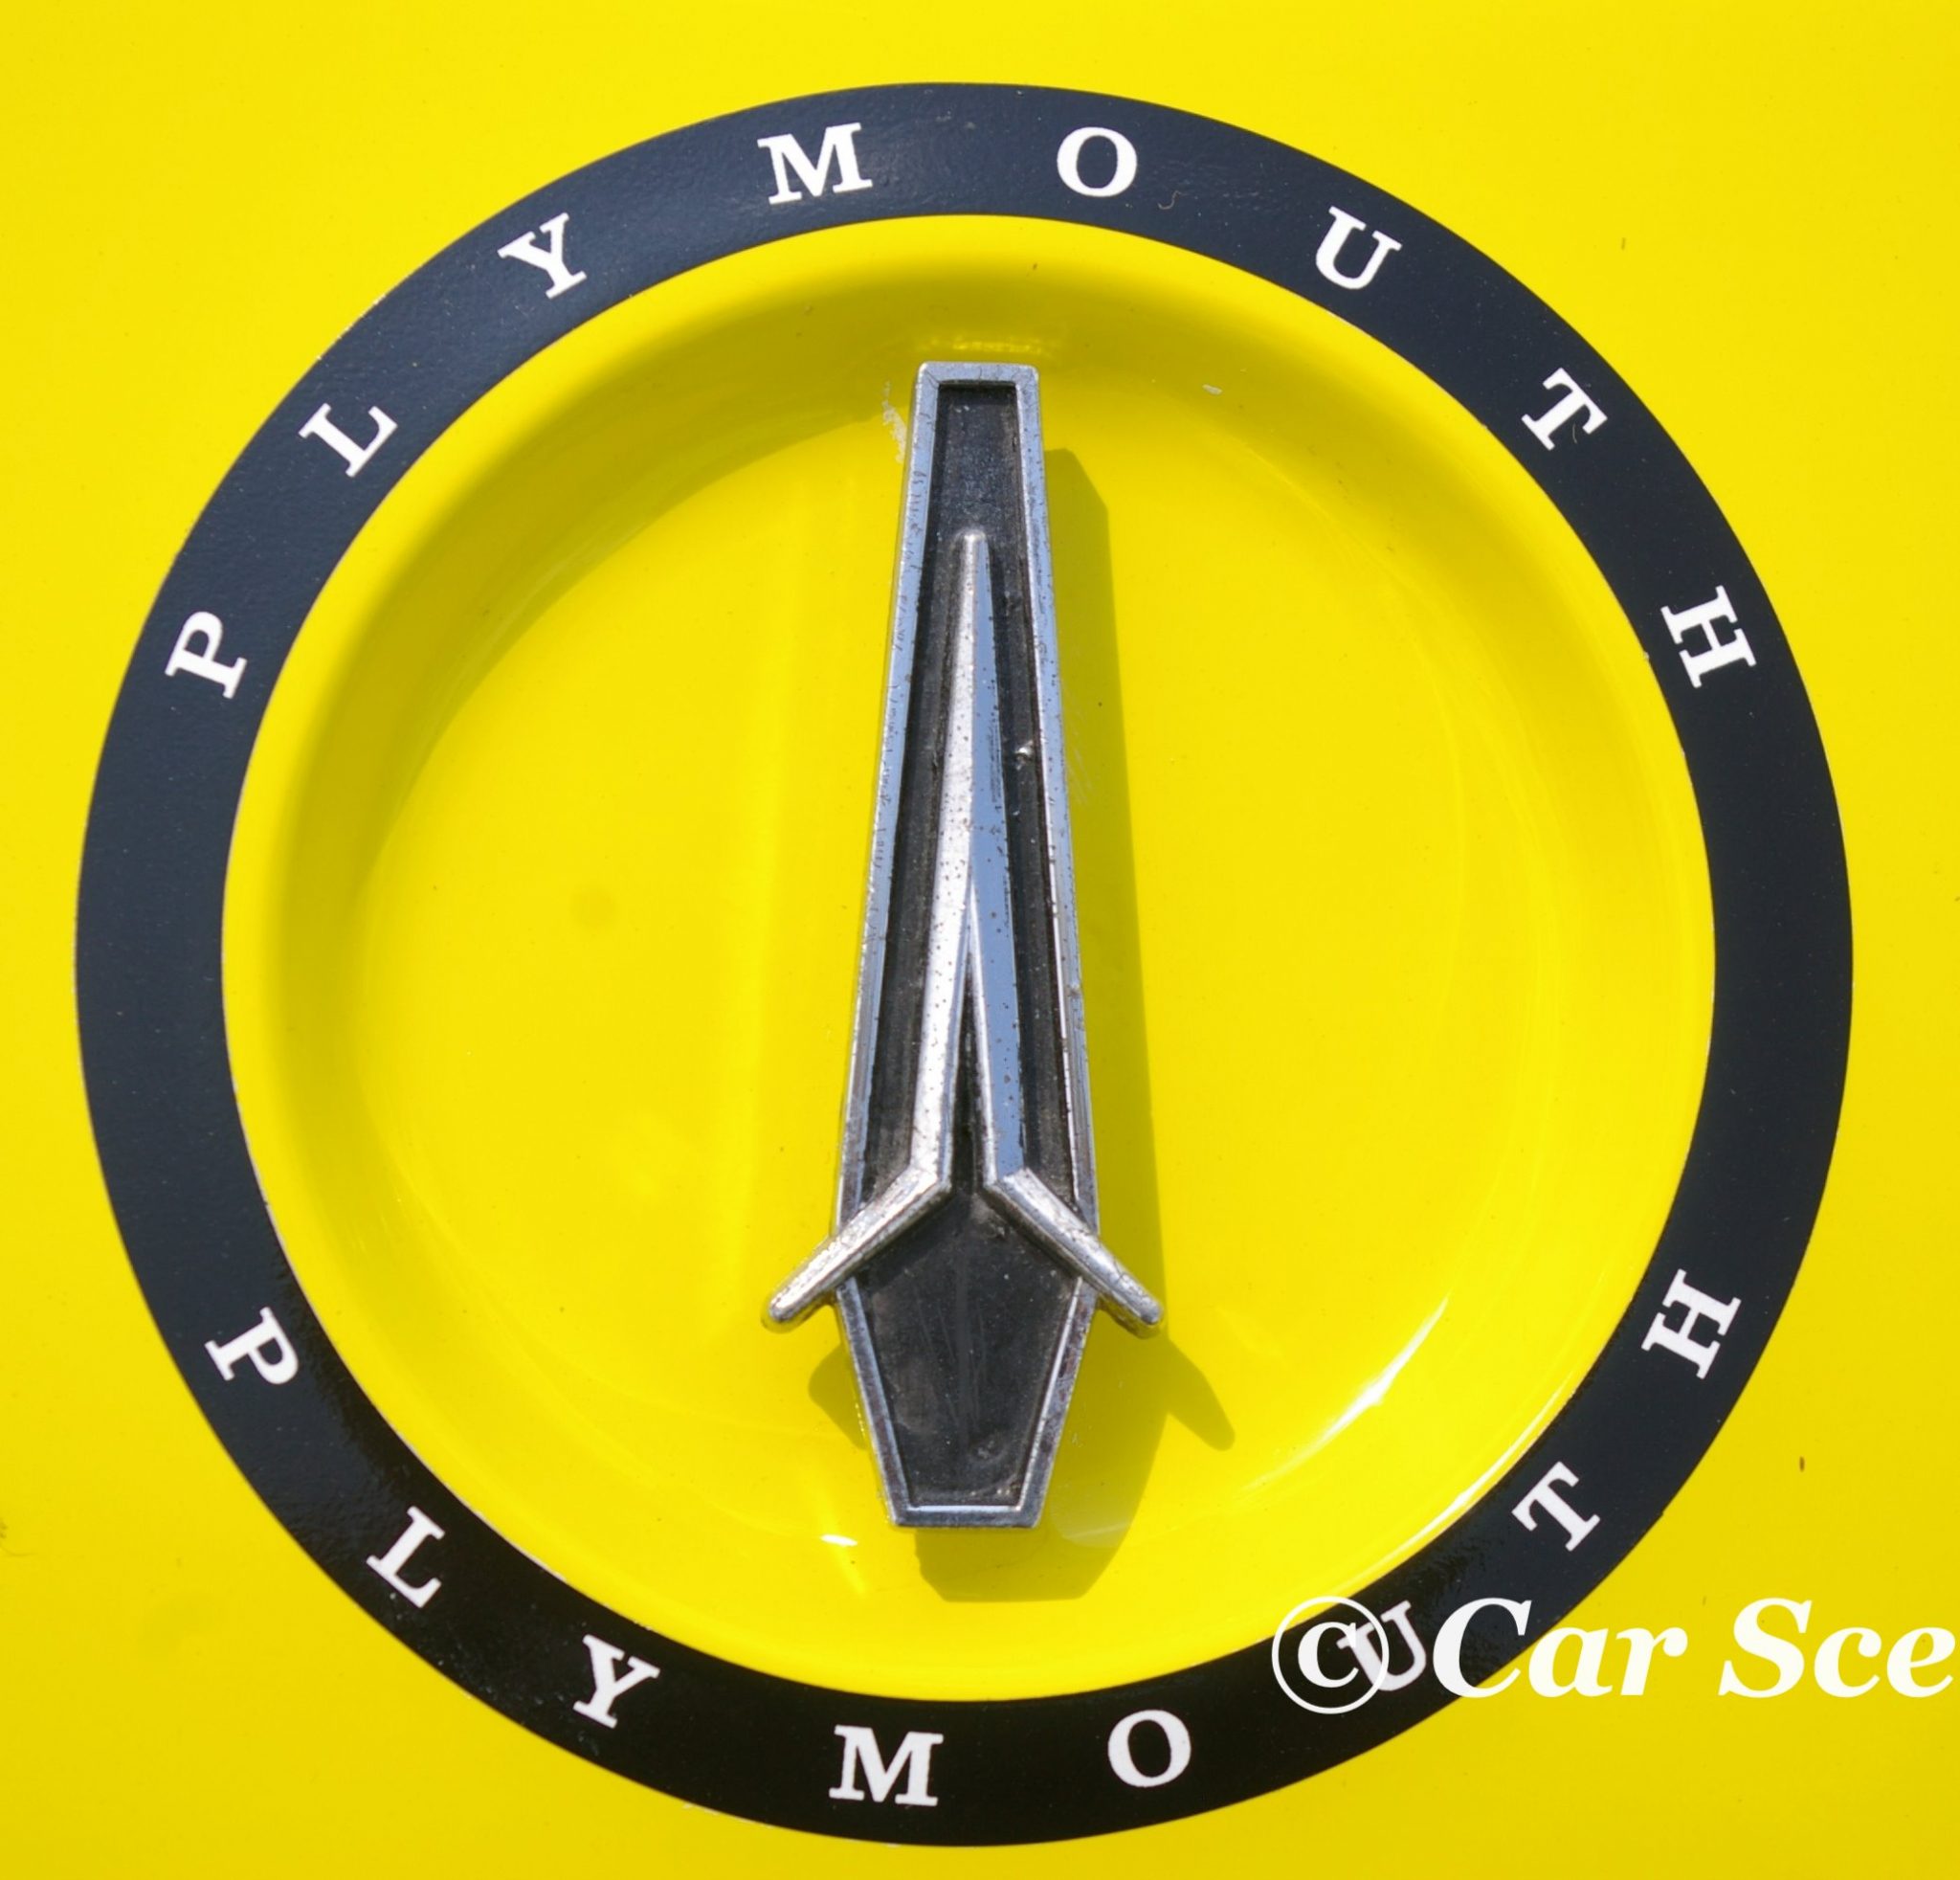 1972 Plymouth Road Runner II front badge